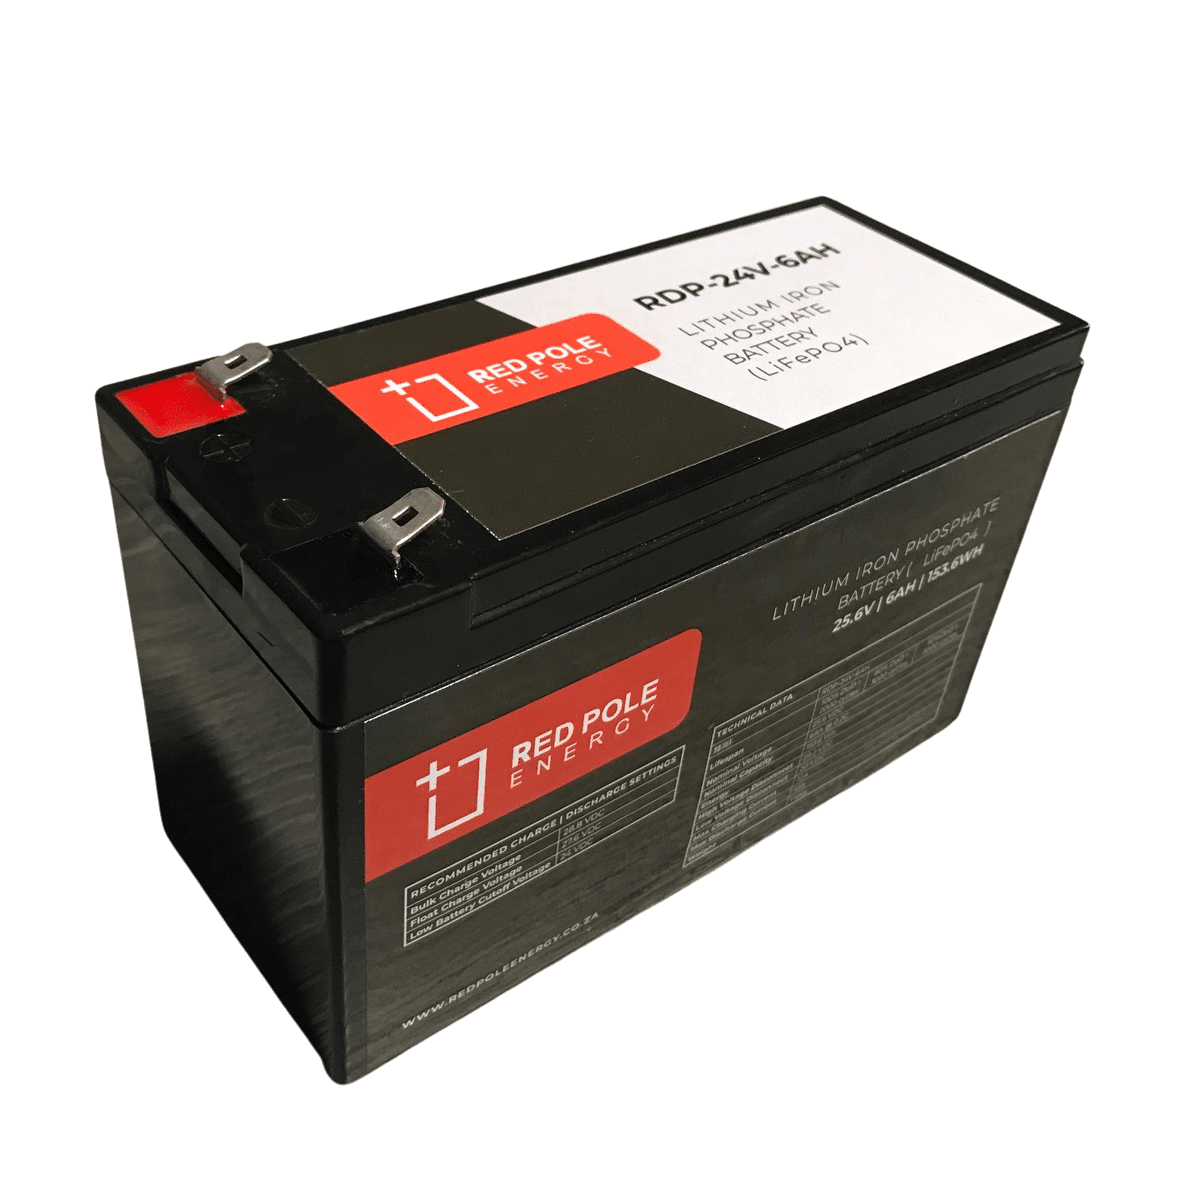 Red Pole Energy 24V 6Ah 153Wh LiFePO4 Battery